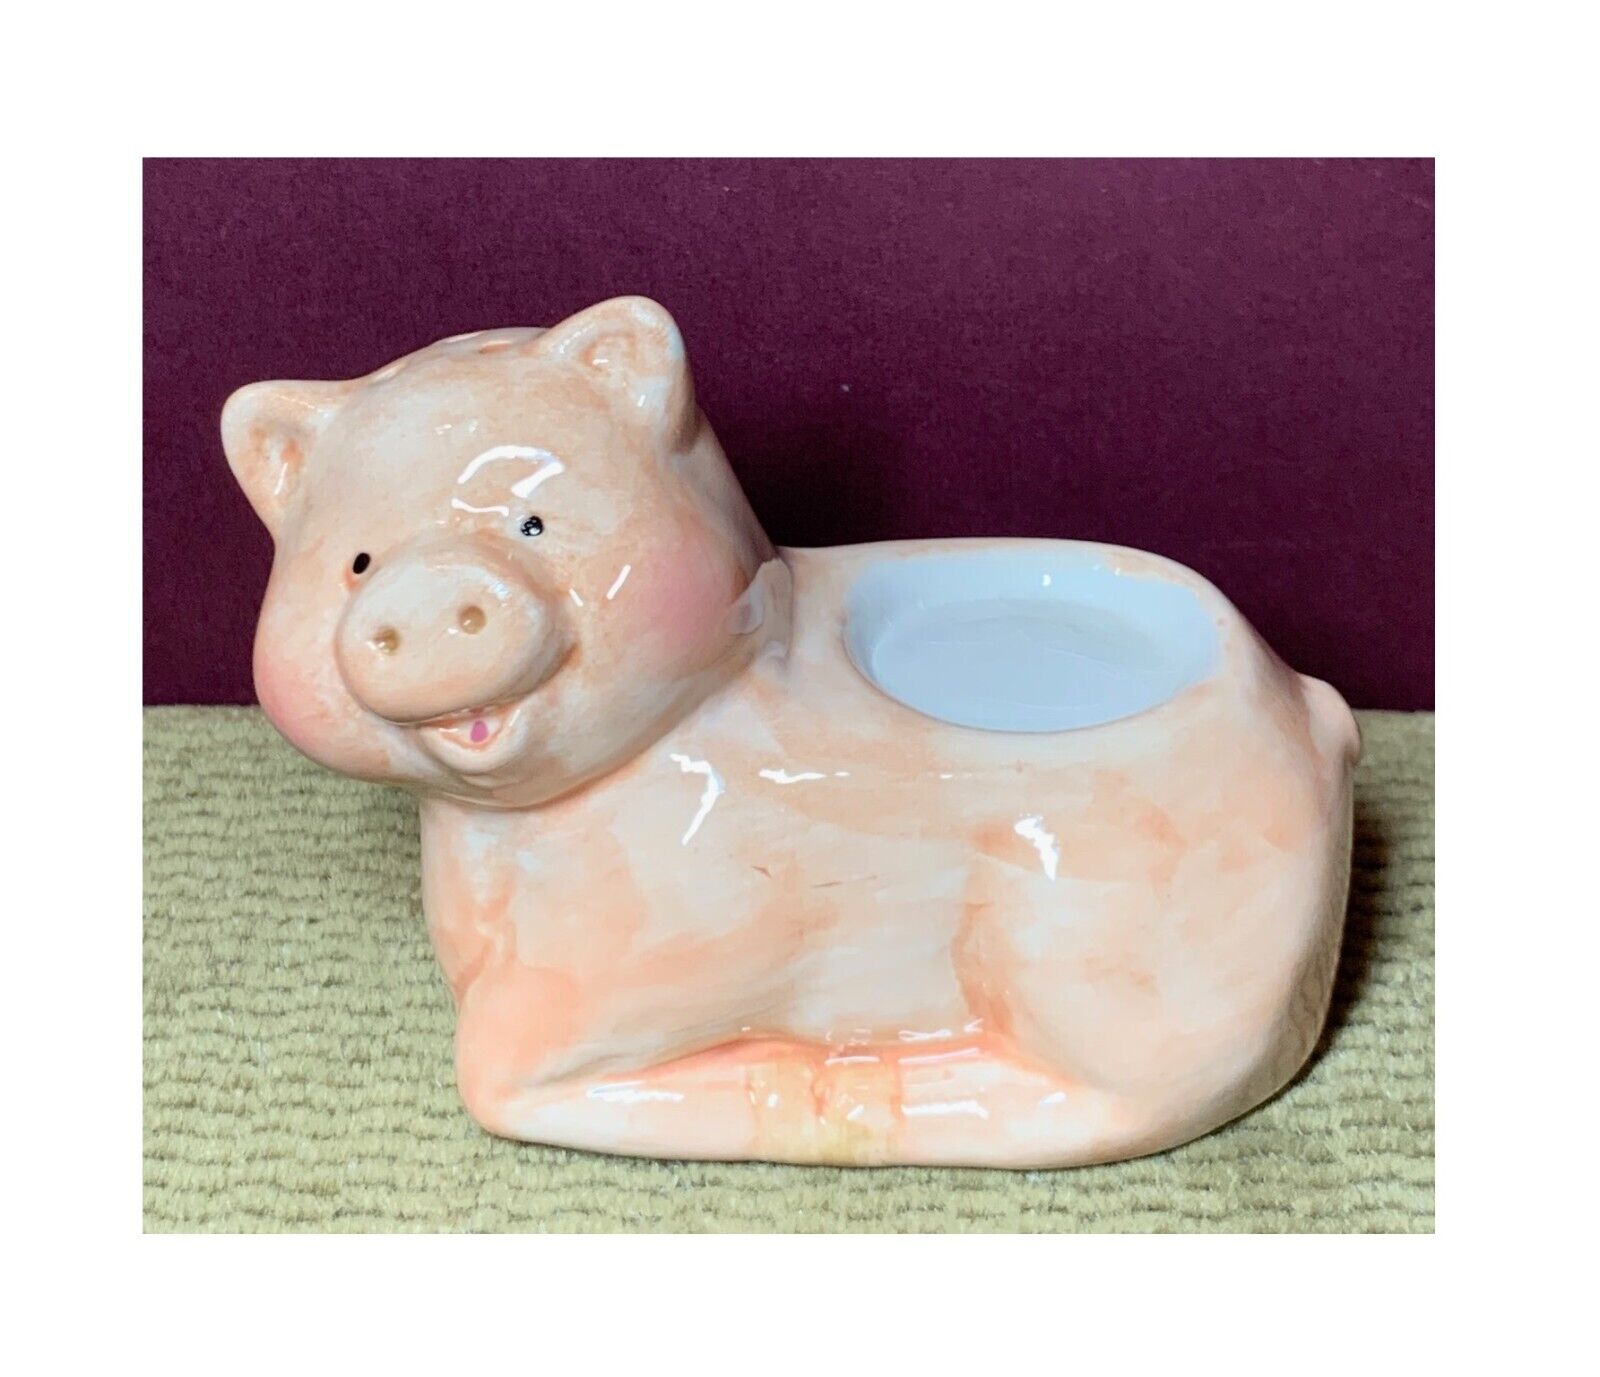 VINTAGE CKO PIG SALT SHAKER - NEED TO REPLACE A BROKEN ONE?